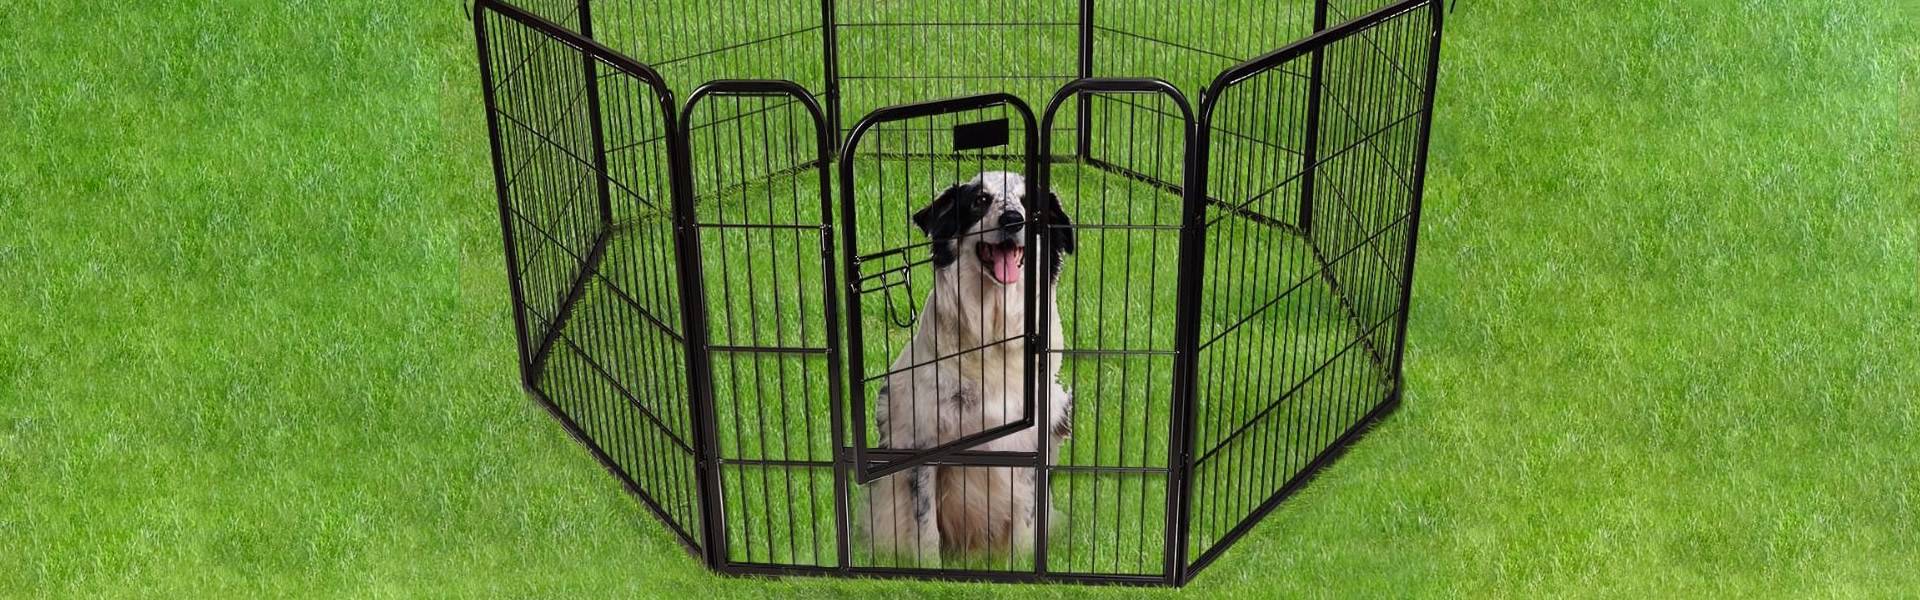 A dog is sitting in a heavy duty exercise pen on the grassland.